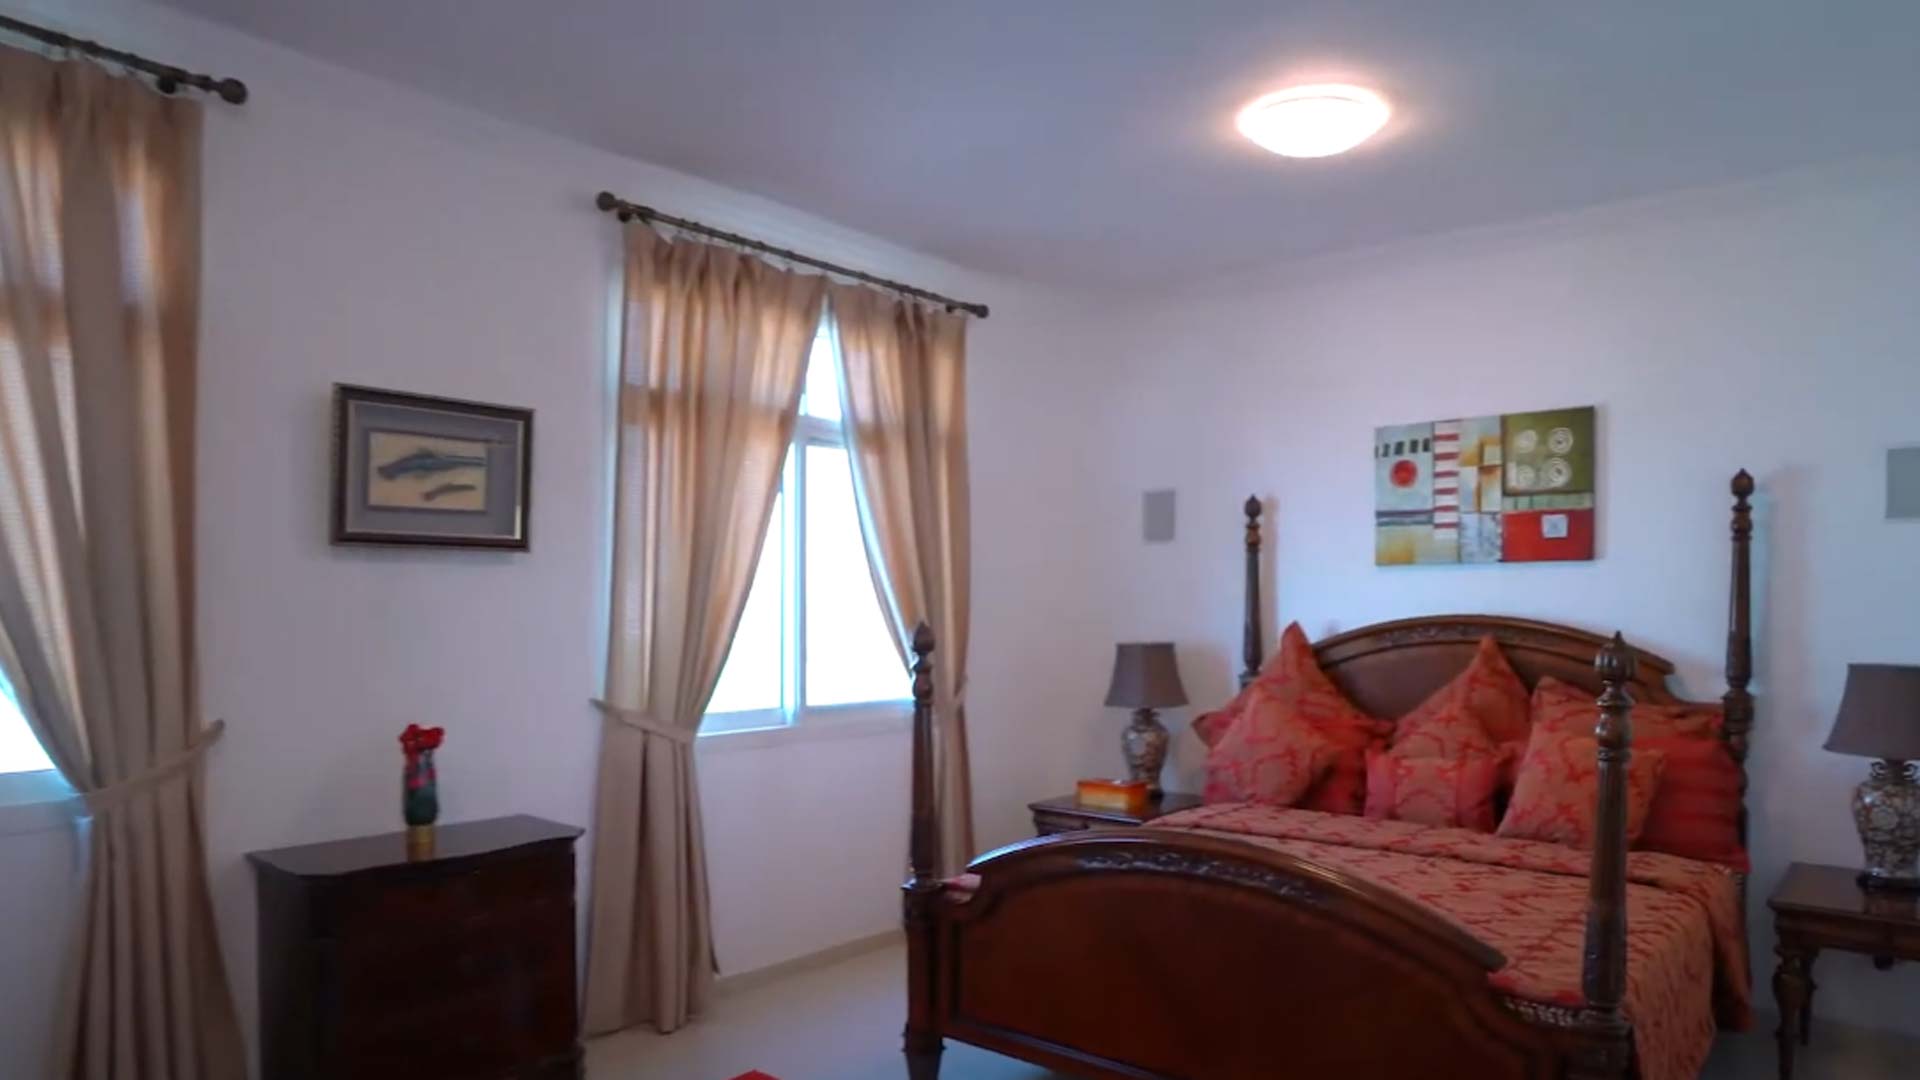 Townhouse for sale in Falcon City of Wonders, Dubai, UAE, 4 bedrooms, 320 m², No. 25313 – photo 4